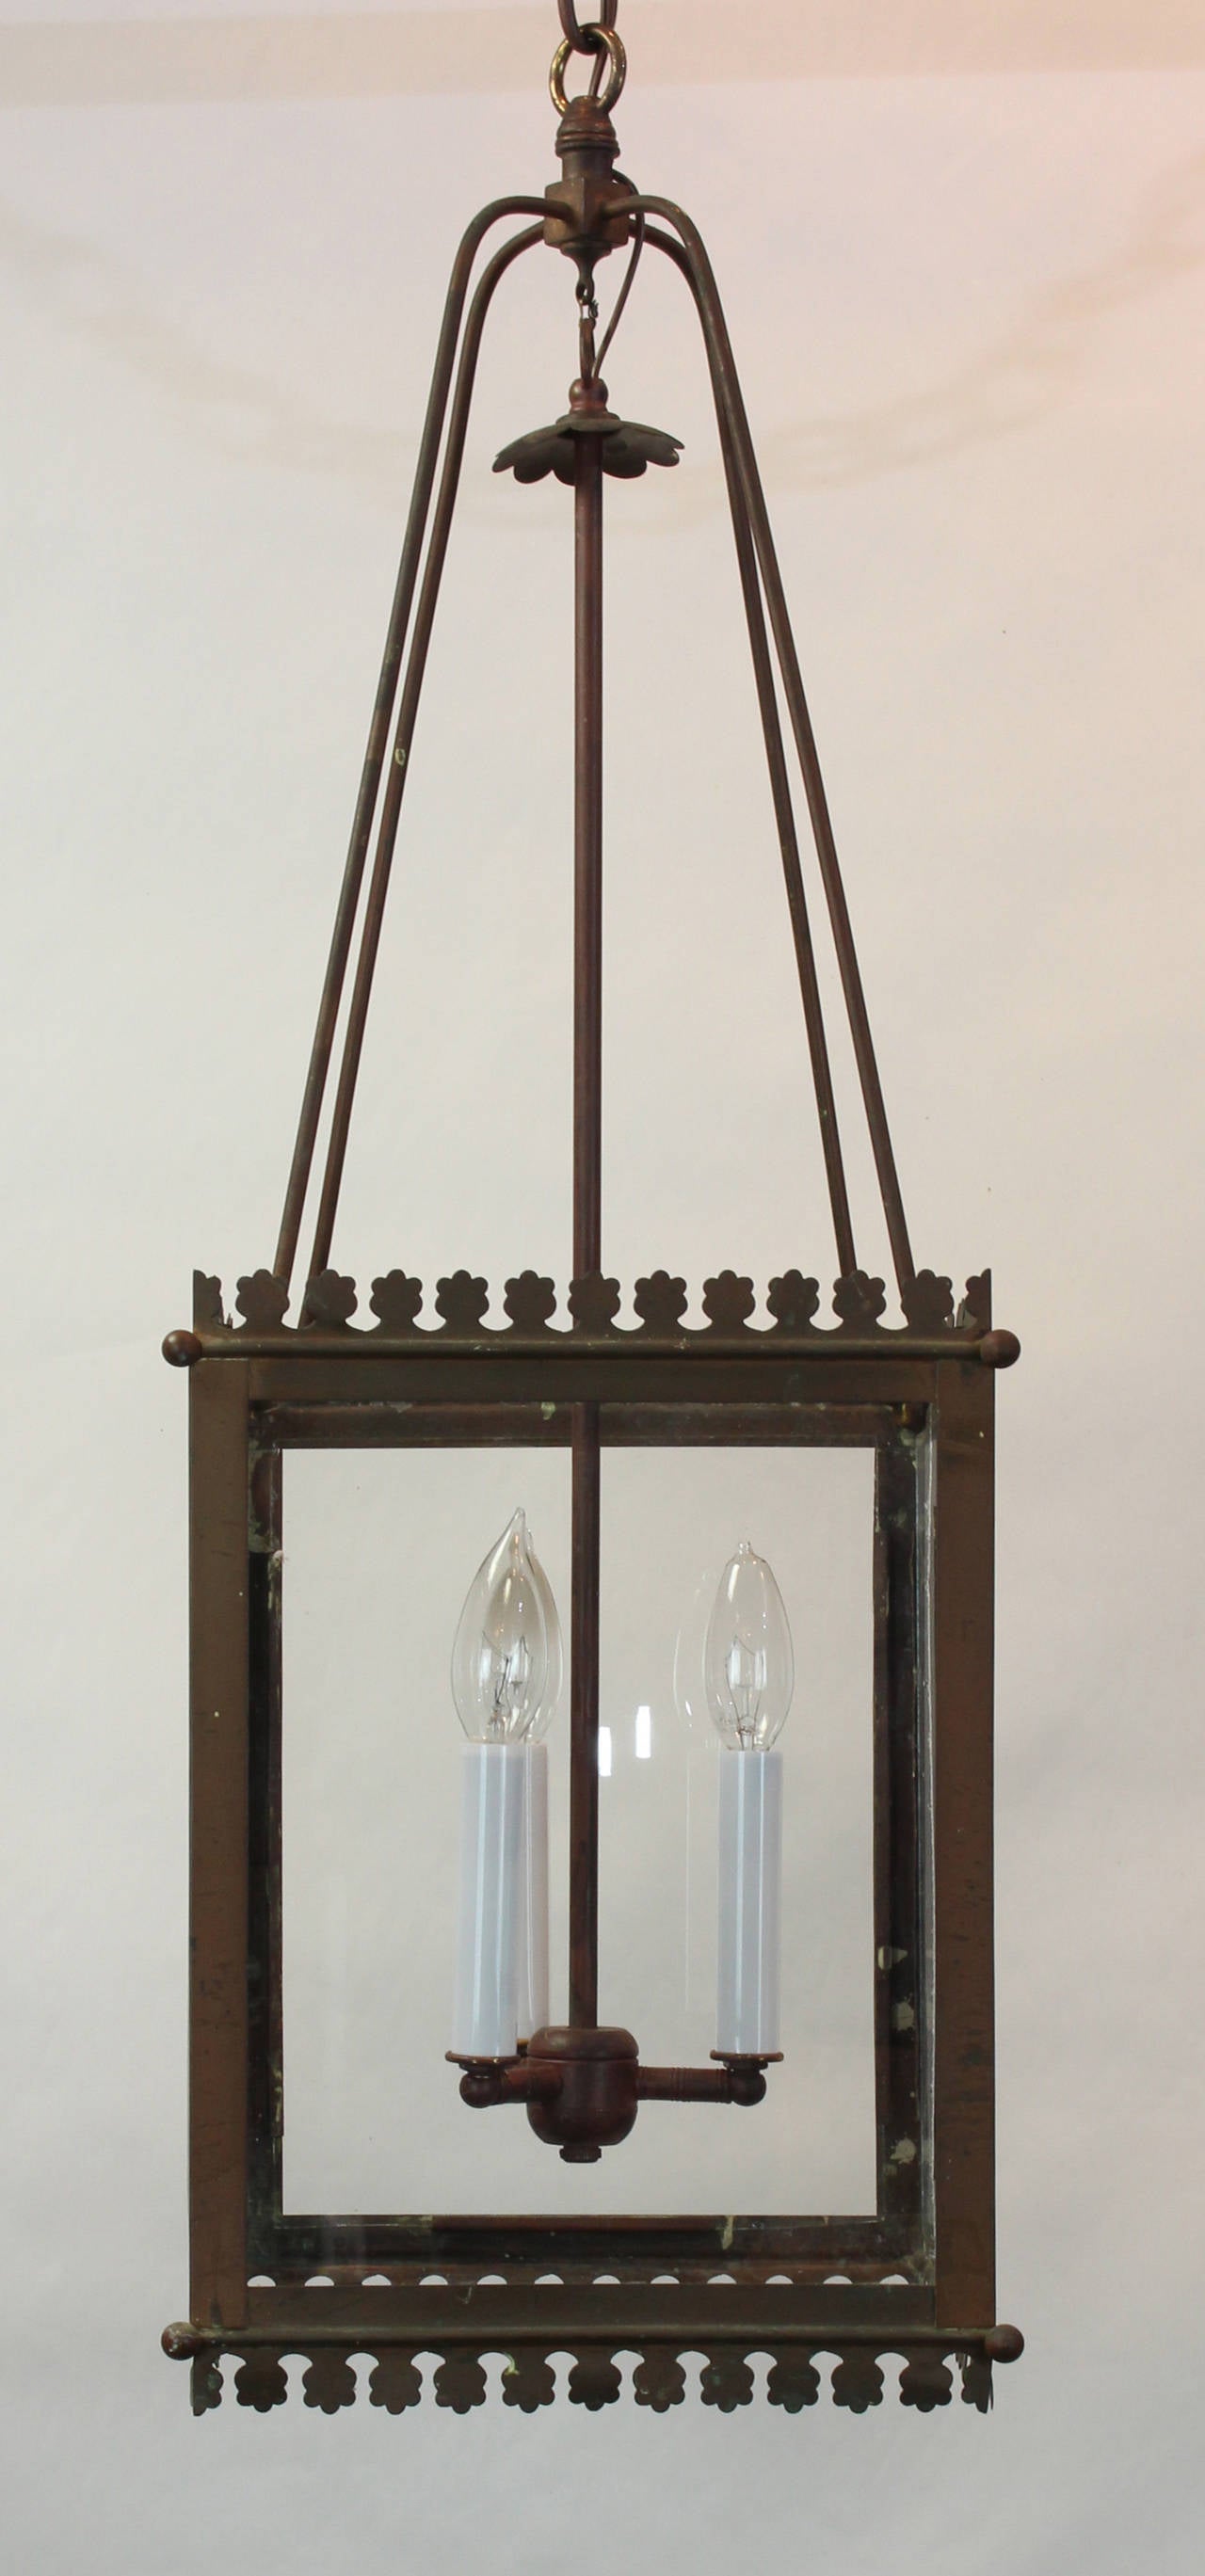 An English Gothic style copper lantern dating from the 1940s.